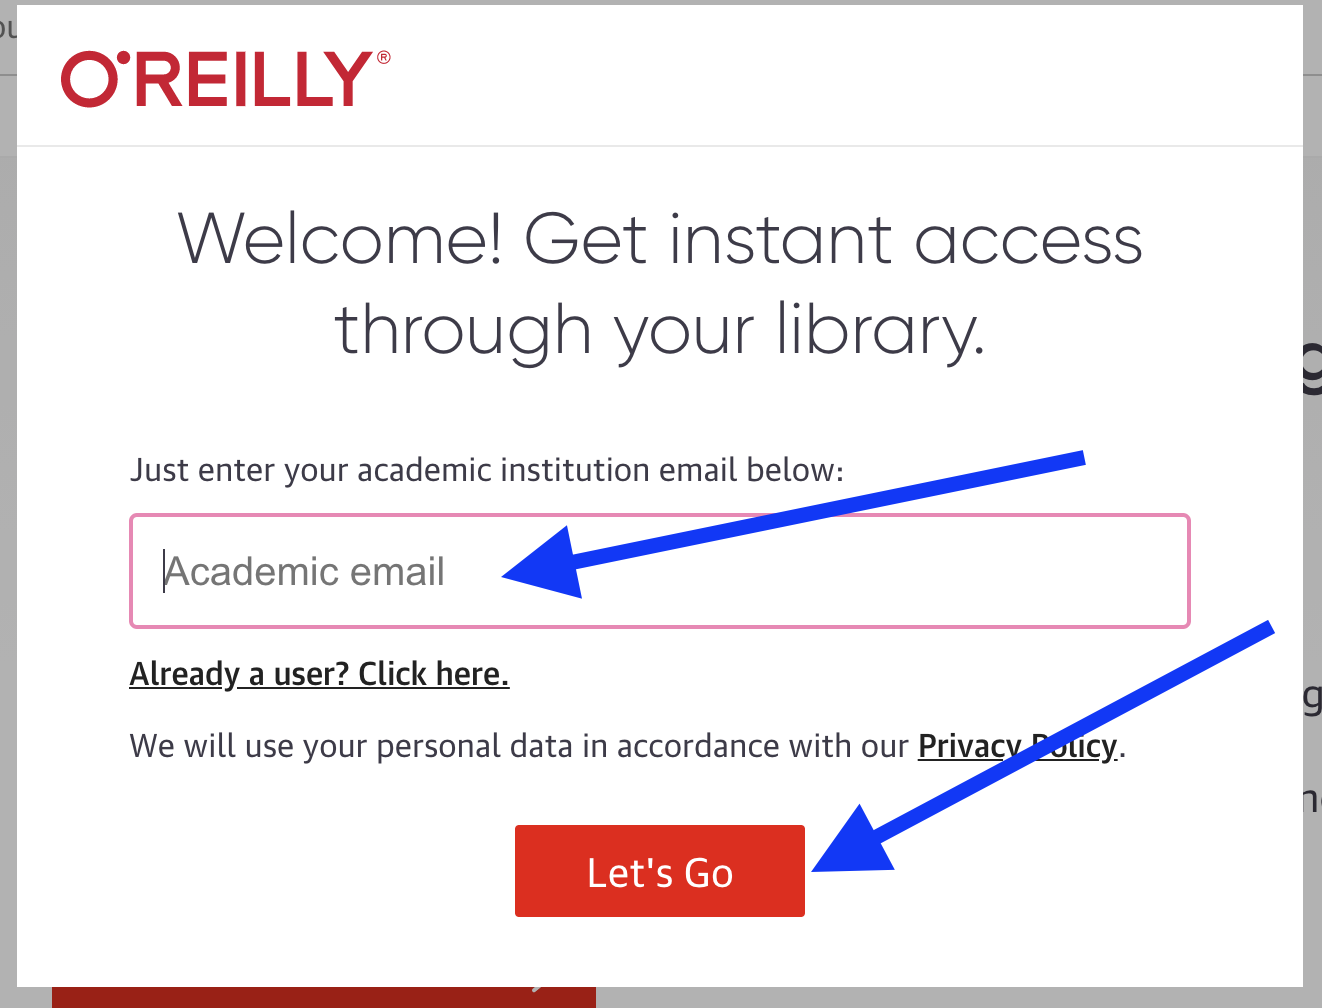 O'Reilly login screen with space to enter your academic email.